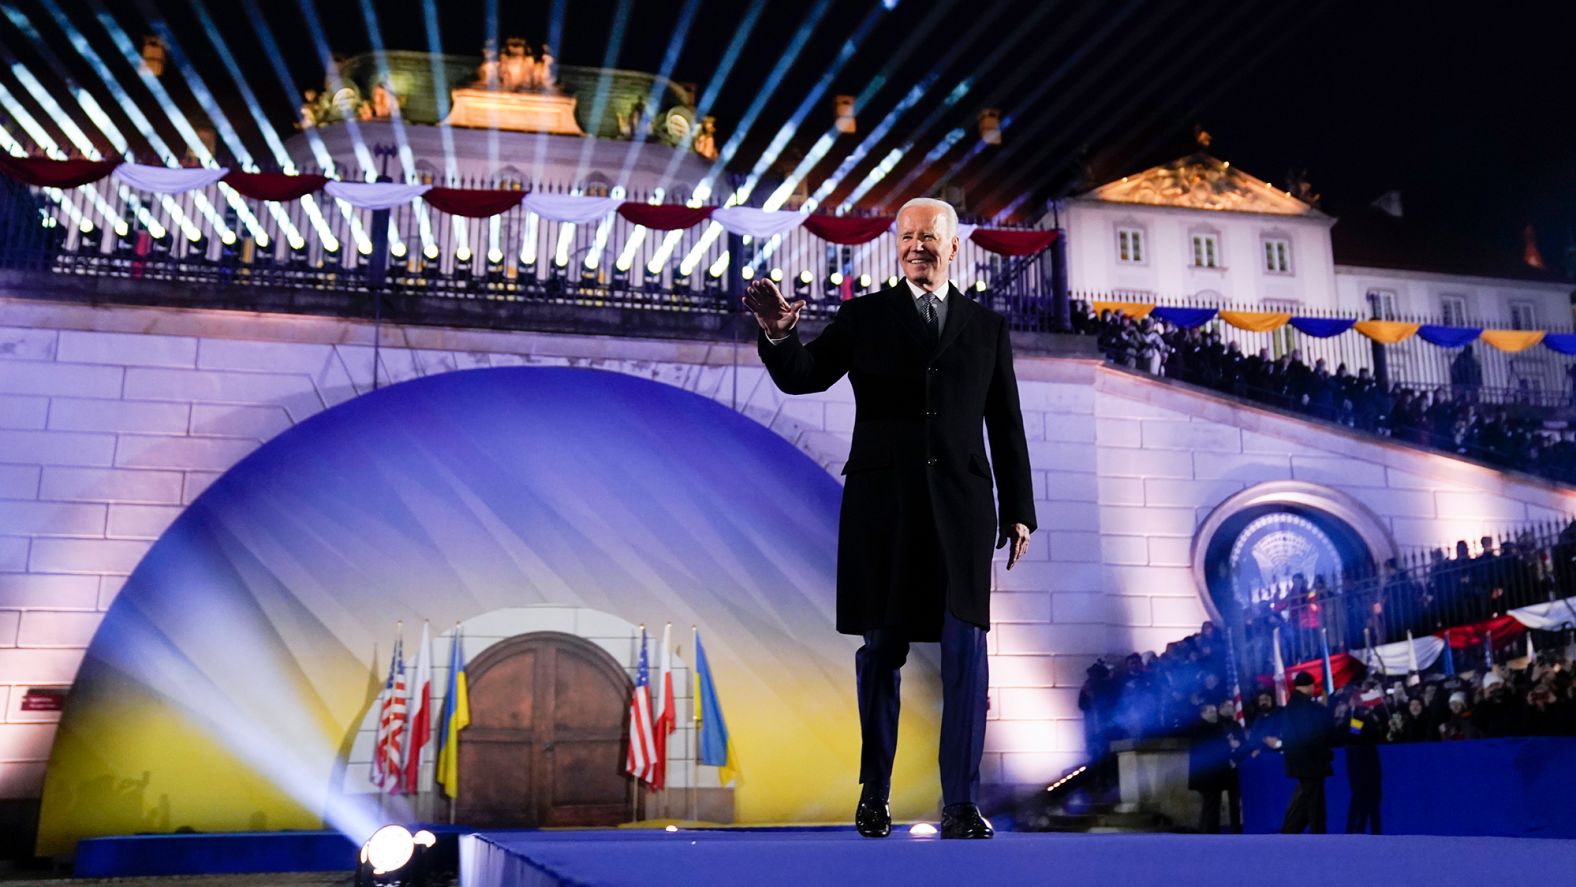 Biden walks out to deliver a speech in Warsaw on Tuesday. "One year ago, the world was bracing for the fall of Kyiv," he said. "Well, I've just come from a visit to Kyiv and I can report Kyiv stands strong. Kyiv stands proud, it stands tall and most important, it stands free."